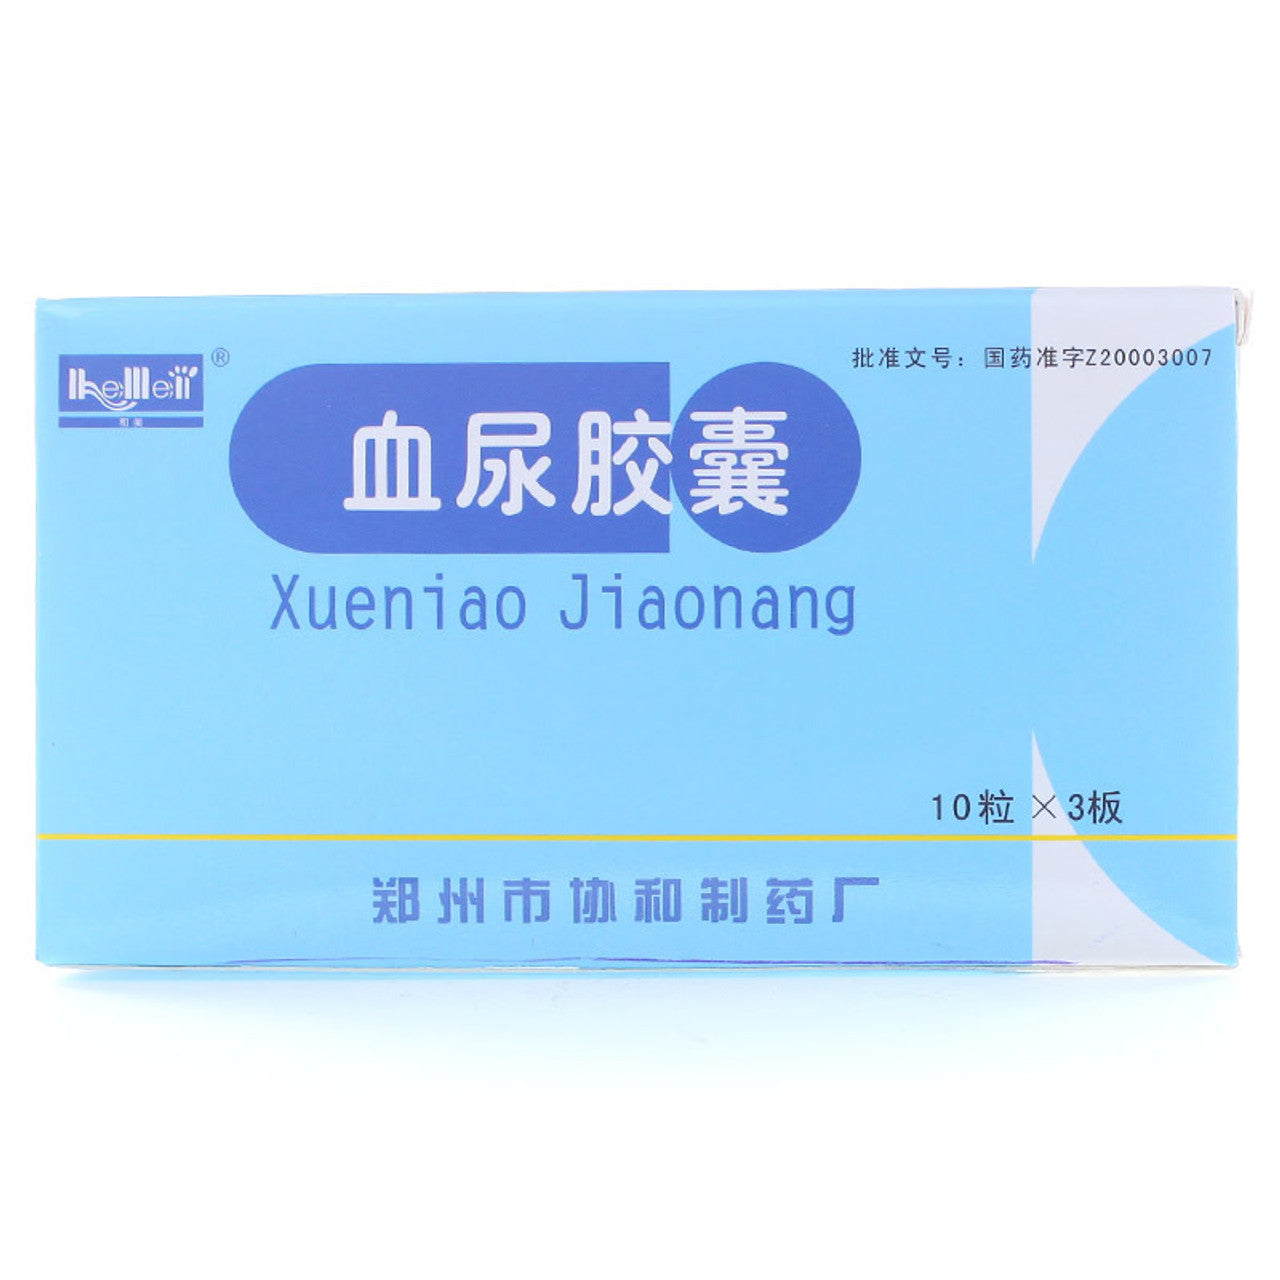 Chinese Herbs. Brand Hemei. Xueniao Jiaonang or Xueniao Capsules or XueNiaoJiaoNang or  Xue Niao Jiao Nang or Xue Niao Capsules  clearing away heat and removing dampness, cooling blood to stop bleeding, for Nephritis